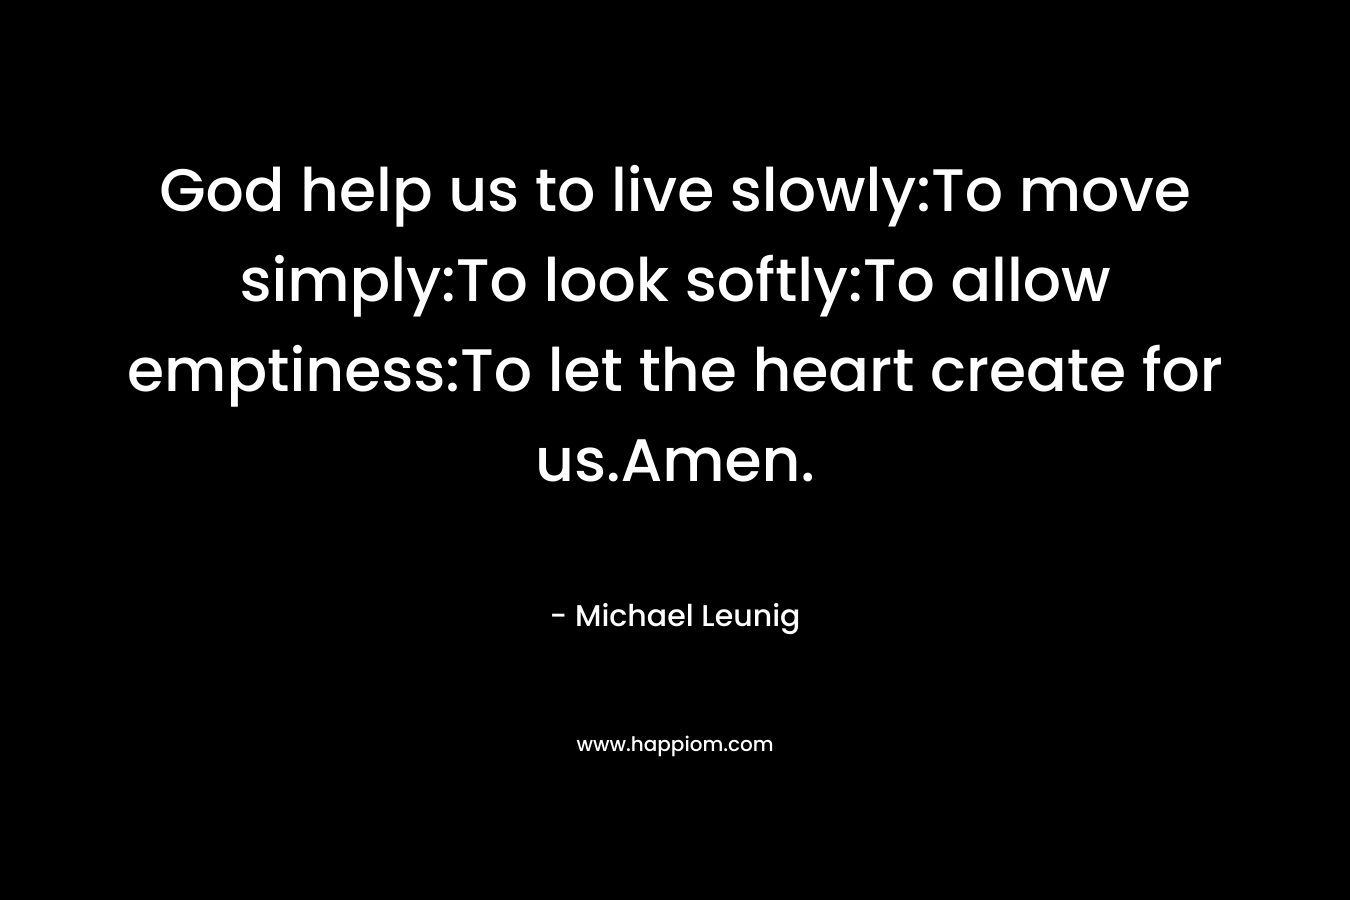 God help us to live slowly:To move simply:To look softly:To allow emptiness:To let the heart create for us.Amen.